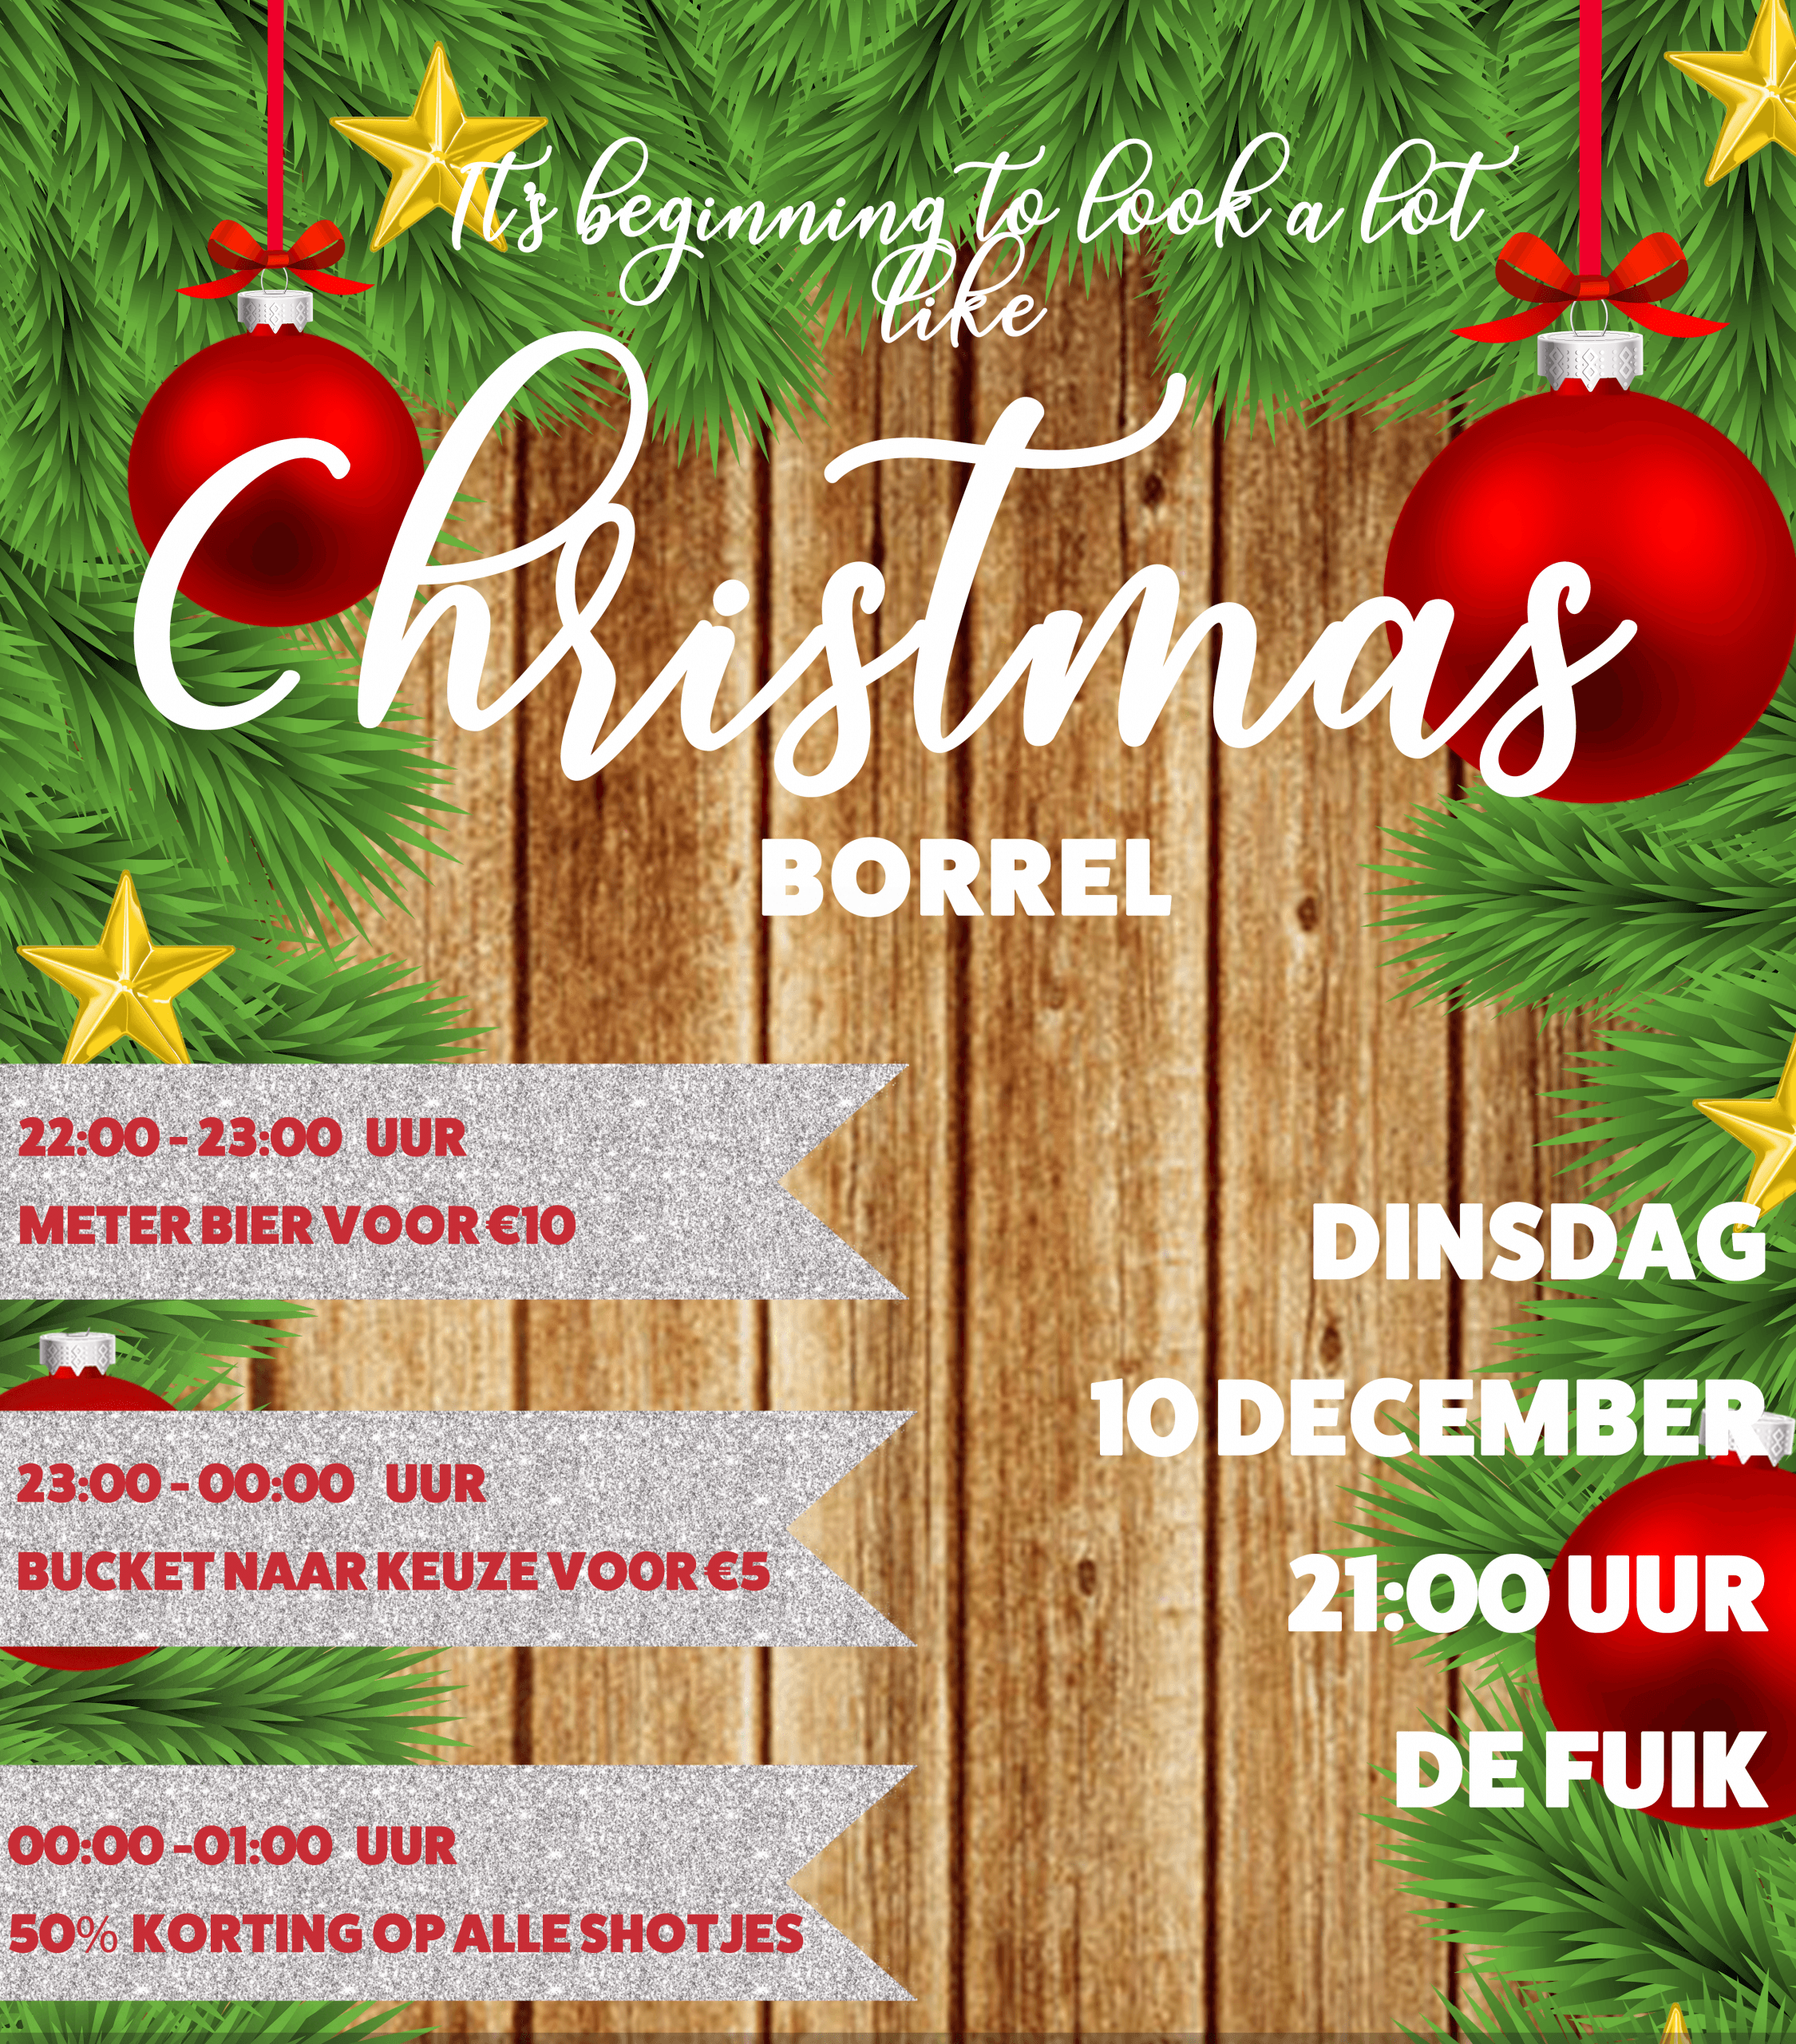 It’s beginning to look a lot like Christmas borrel